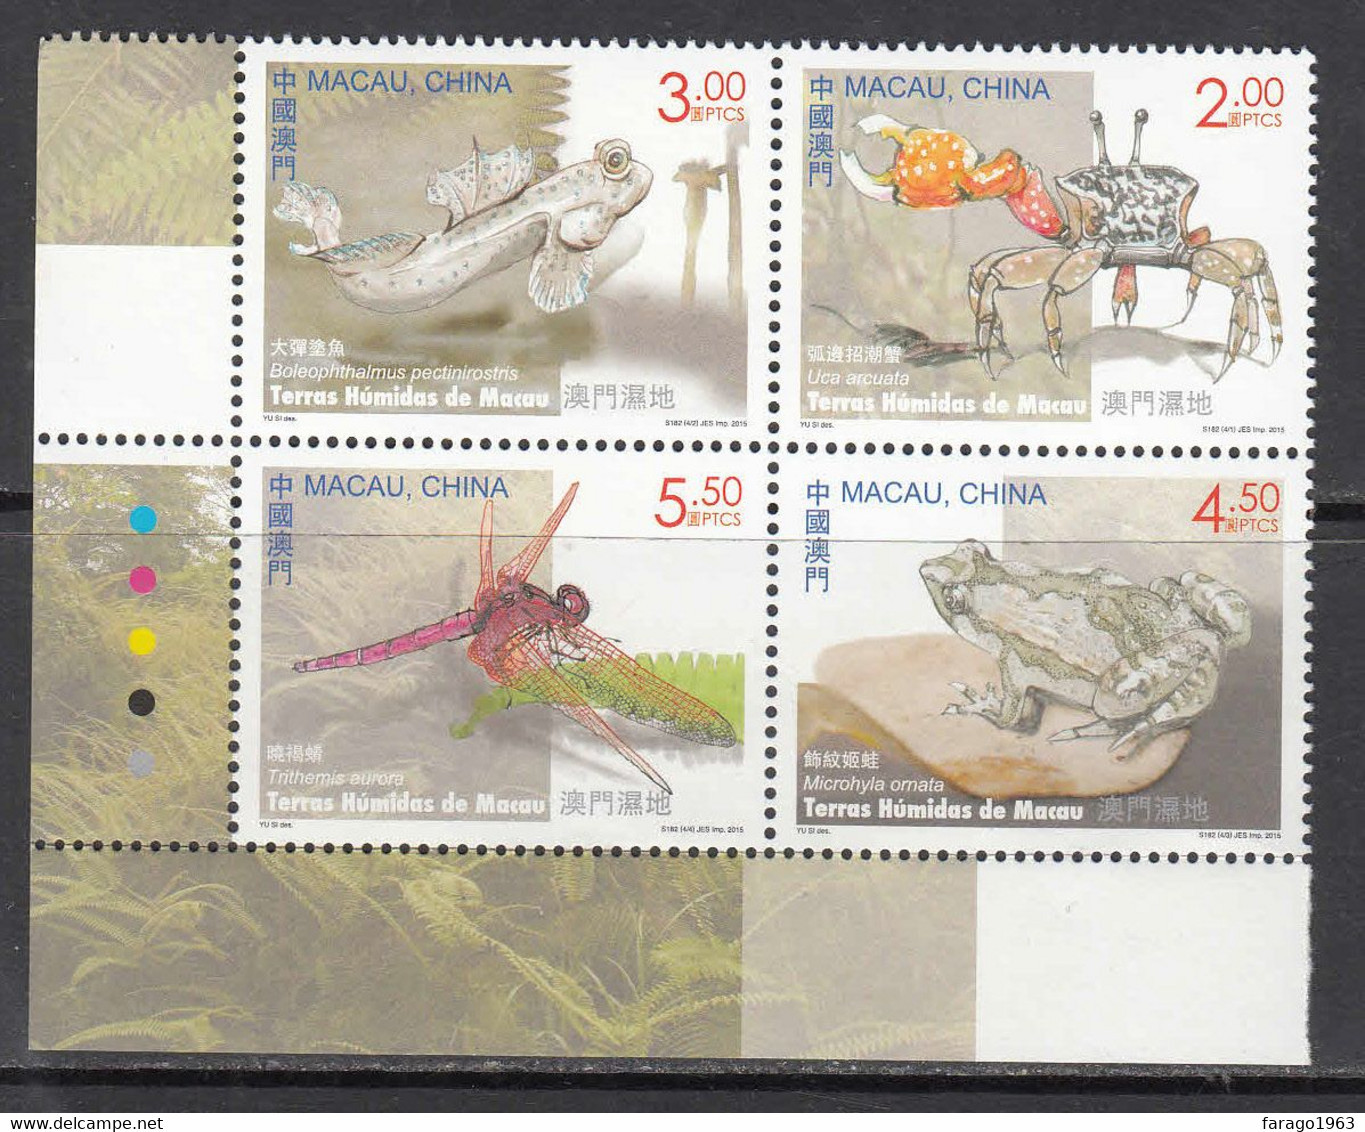 2015 Macau Wetlands Wildlife Crabs Fish Insects Frogs Complete Set Block Of 4 MNH @  FACE VALUE - Neufs